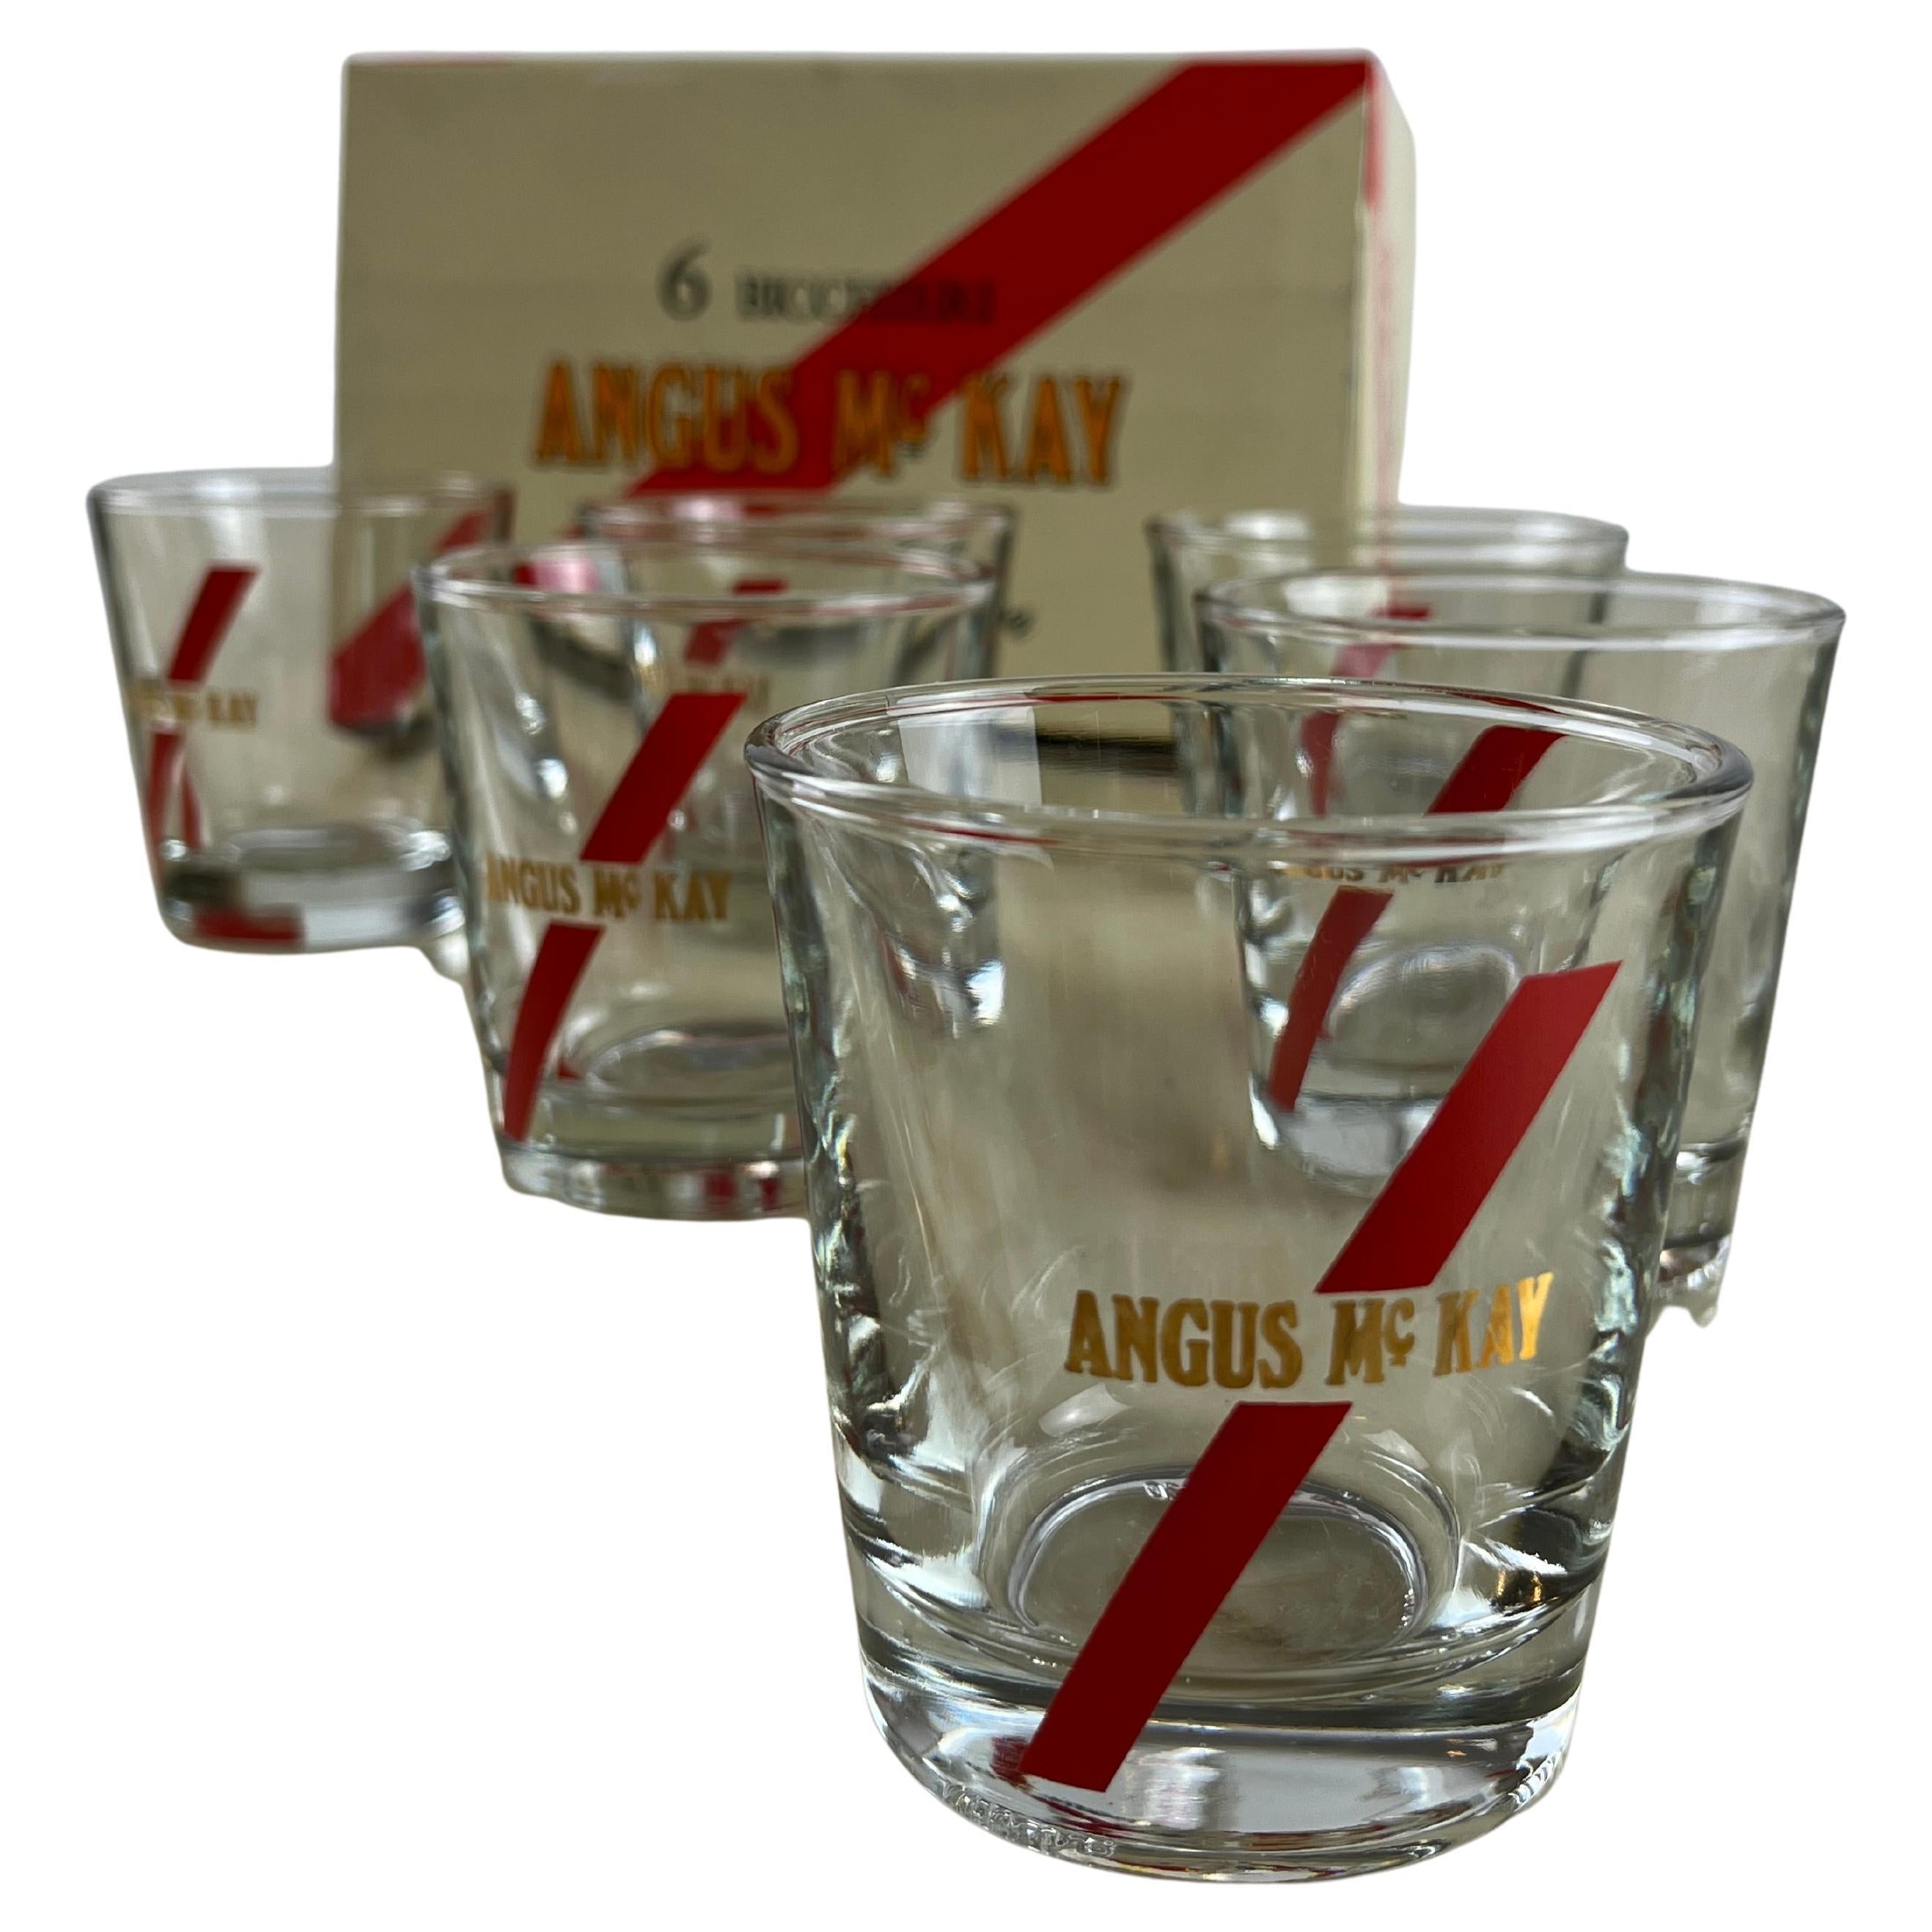 https://a.1stdibscdn.com/six-vintage-whiskey-glasses-boxed-never-used-augus-mc-kay-1970-for-sale/f_83792/f_338245321681546249961/f_33824532_1681546251148_bg_processed.jpg